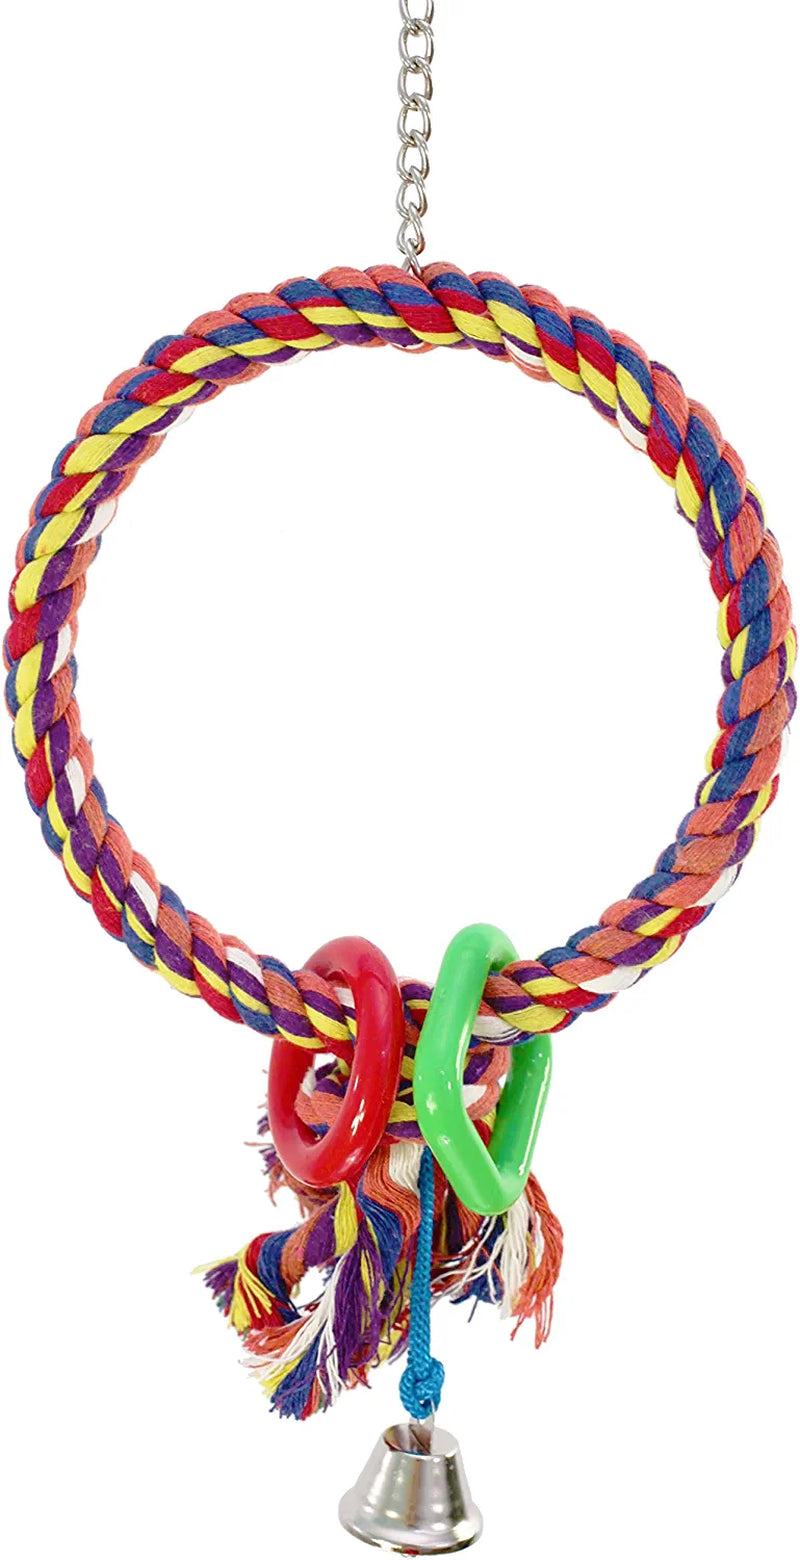 Bonka Bird Toys 1046 Huge Rope Ring Cotton Colorful Rainbow Parrot Macaw African Grey Cockatoo Large  Bonka Bird Toys (6) Inch Ring  